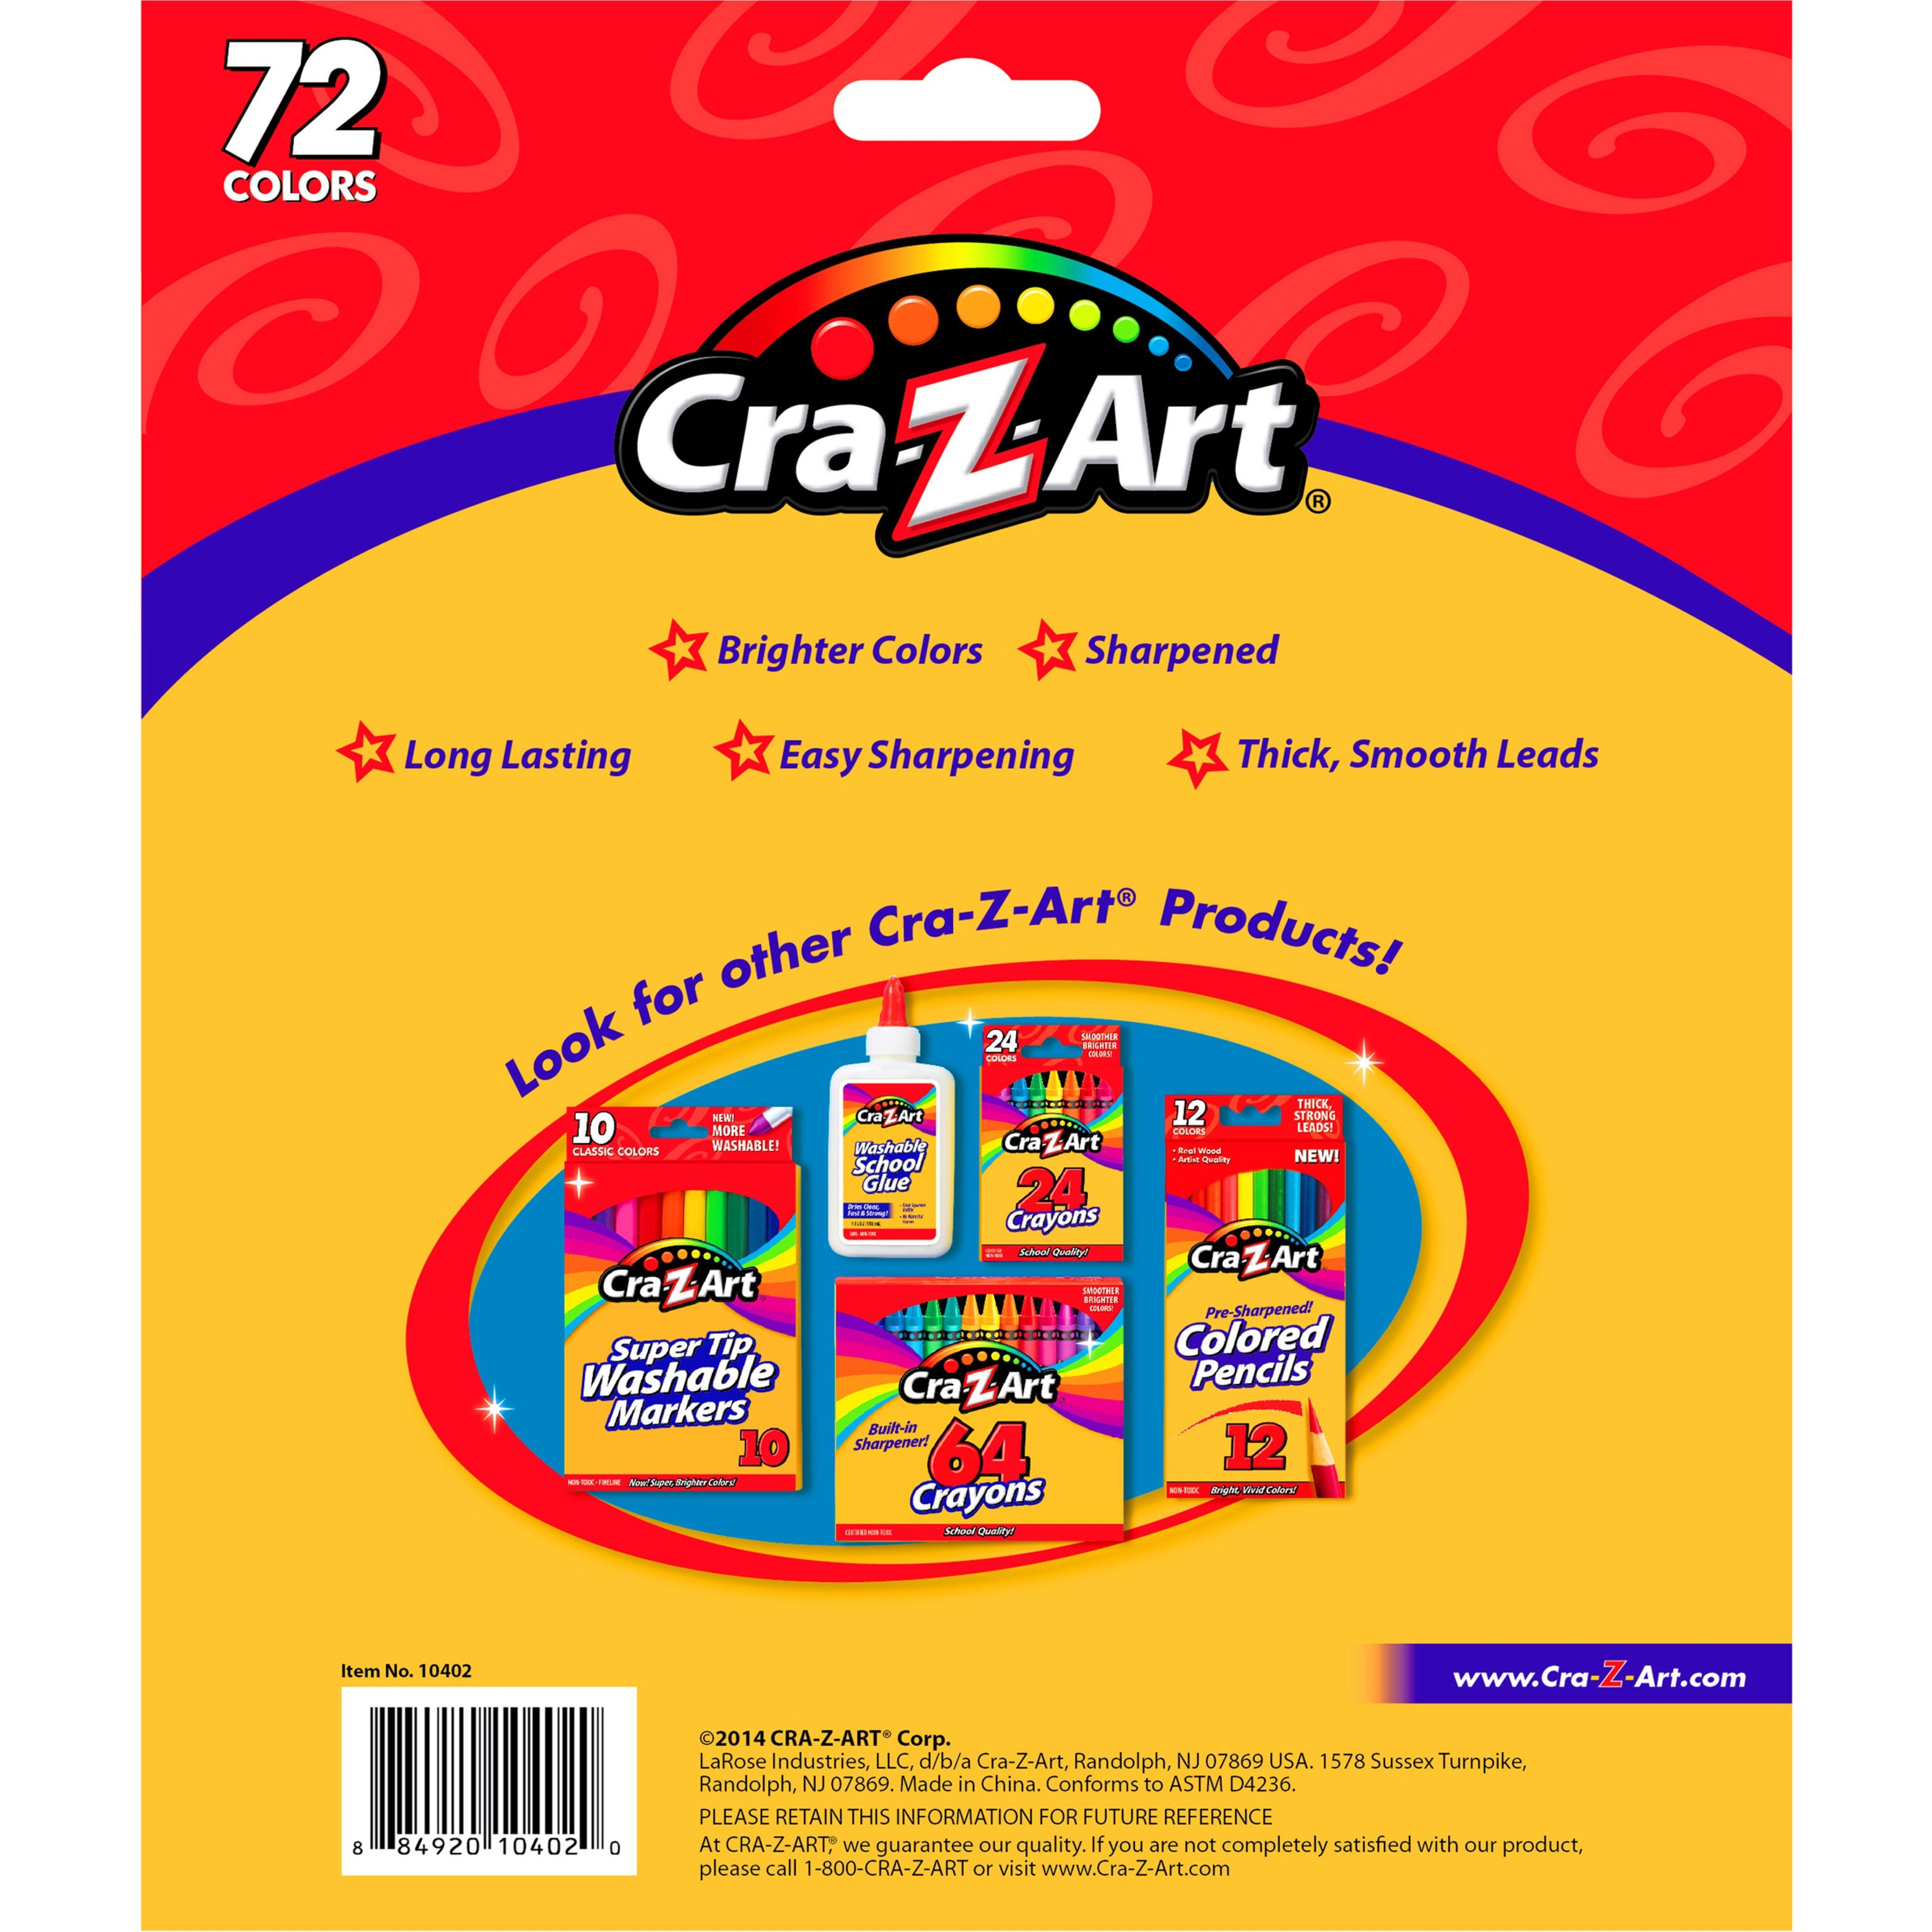 Cra-Z-Art Classic Colored Pencils, 72 Count, Multicolor, Beginner Child to Adult, Back to School - image 5 of 9